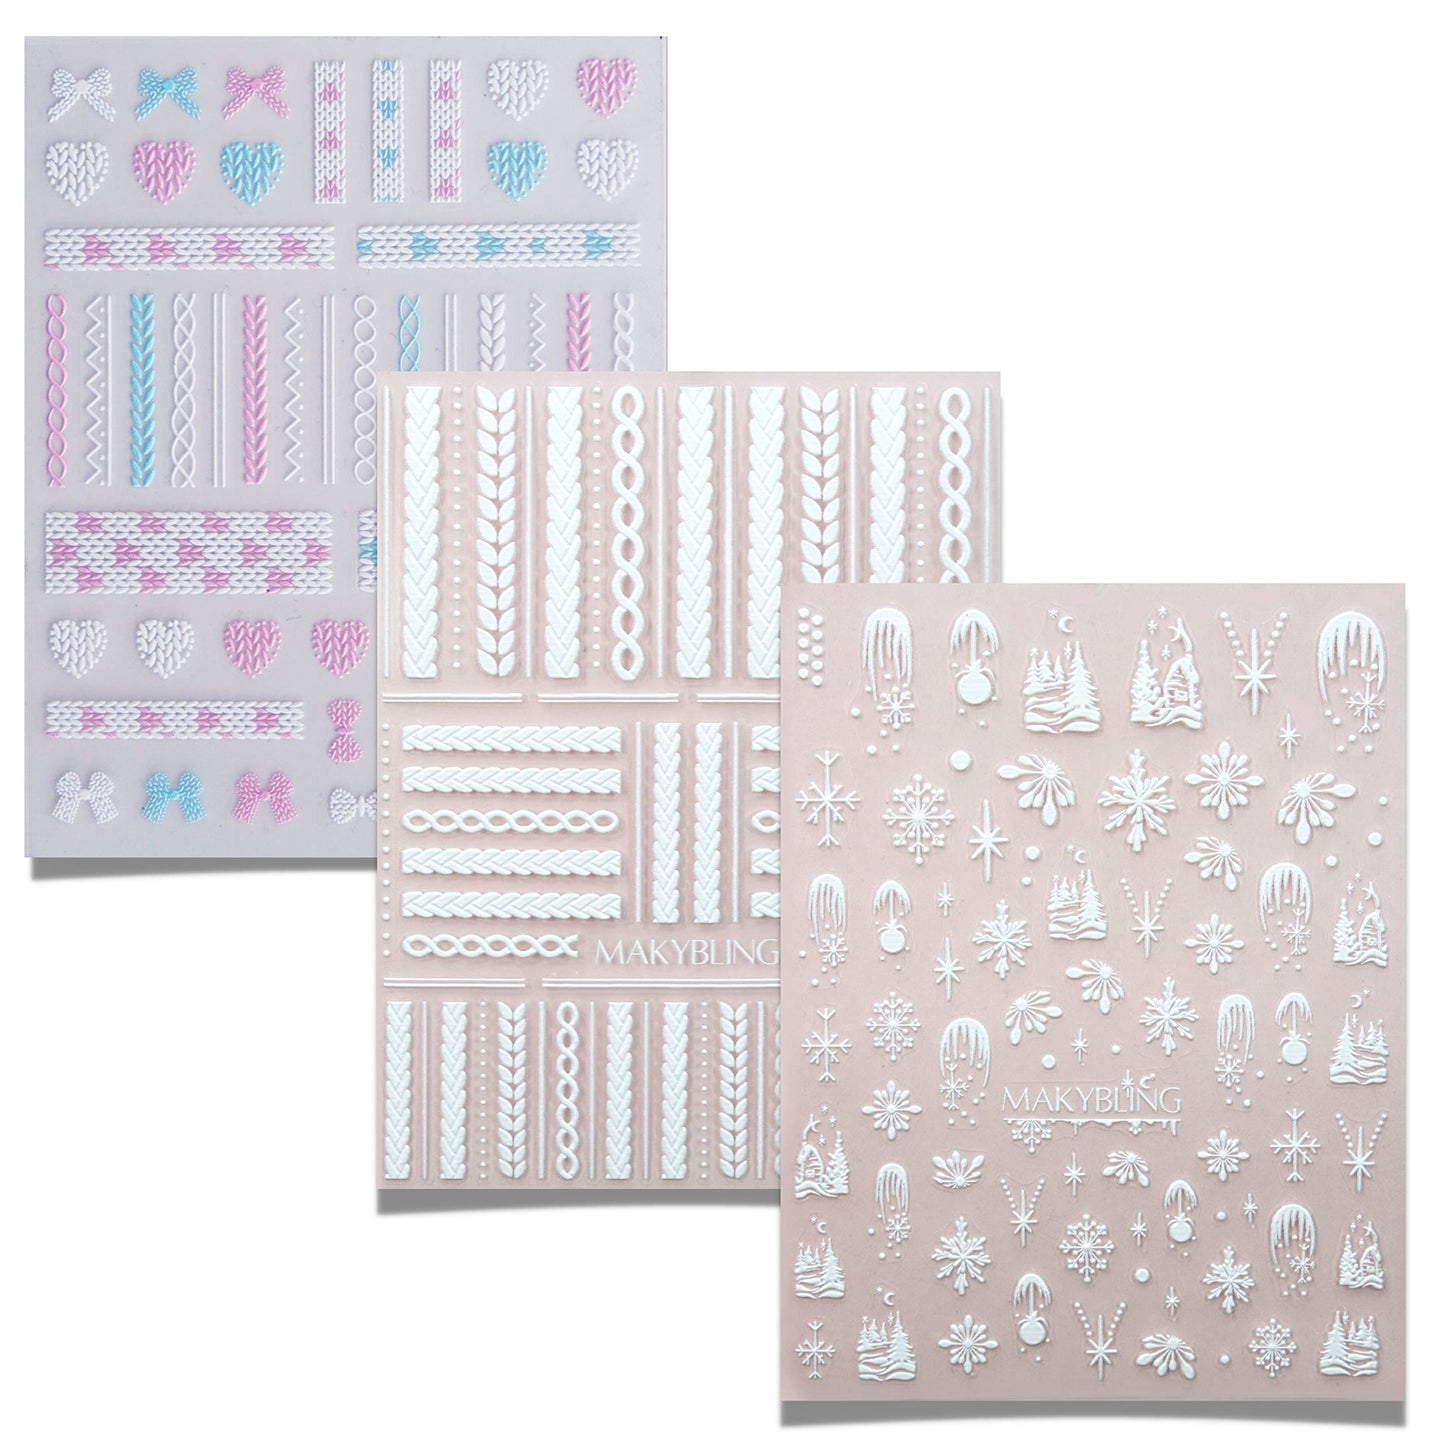 3pcs Winter Snow Flake Sweater Knit Beanie Nail Stickers 3D Embossed Peel Off White Fall Nail Decals